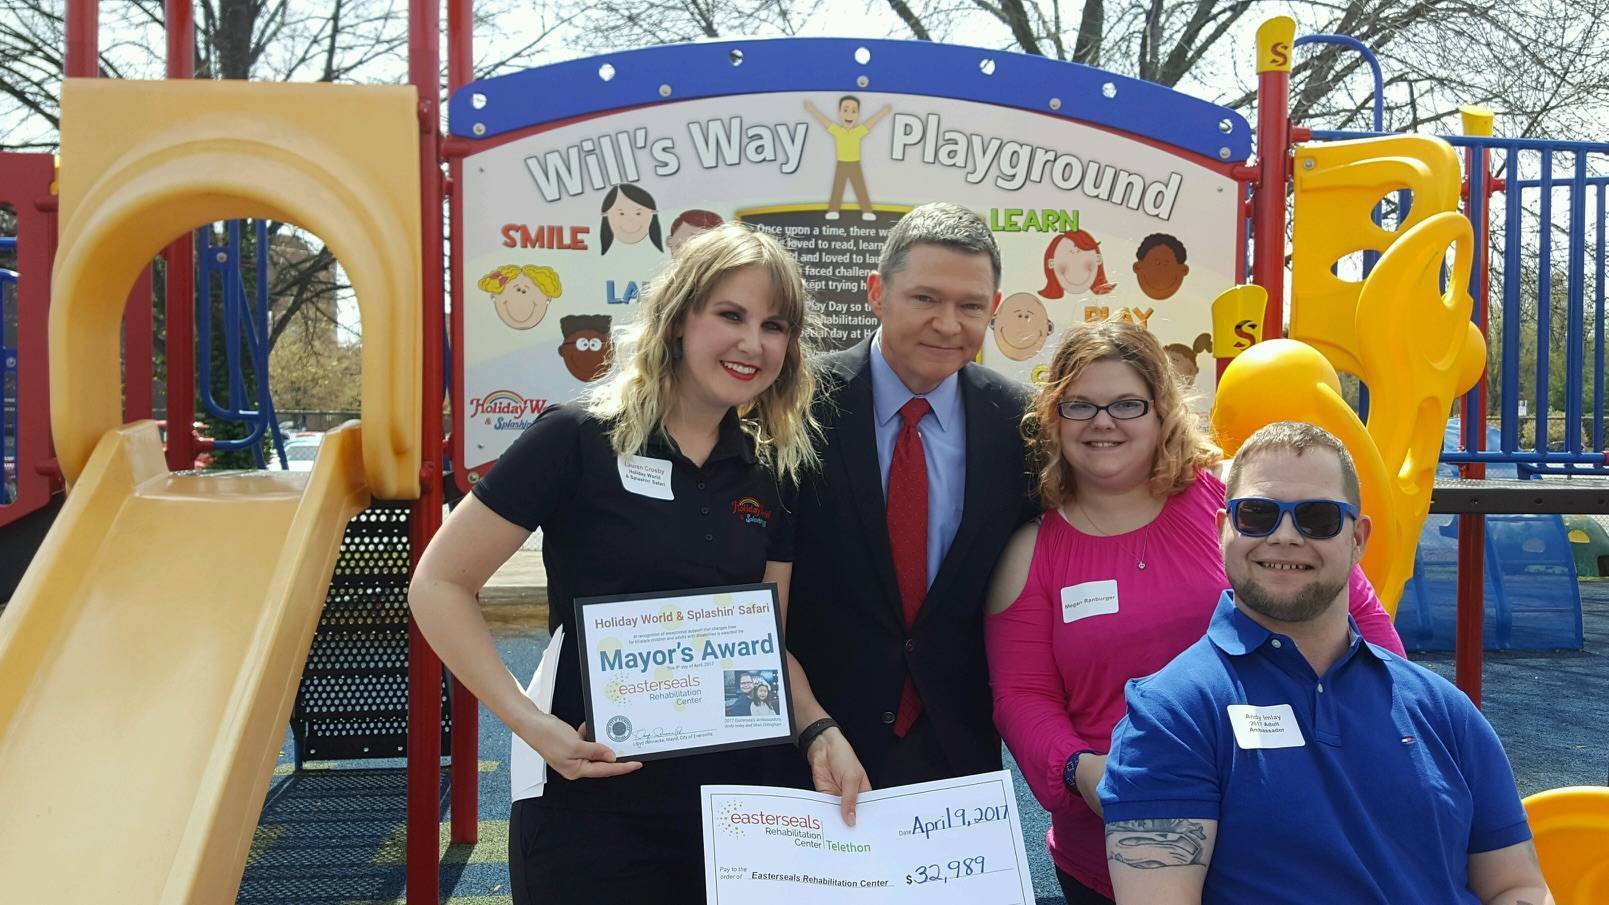 Lauren Presenting Will's Way Playground at Easterseals